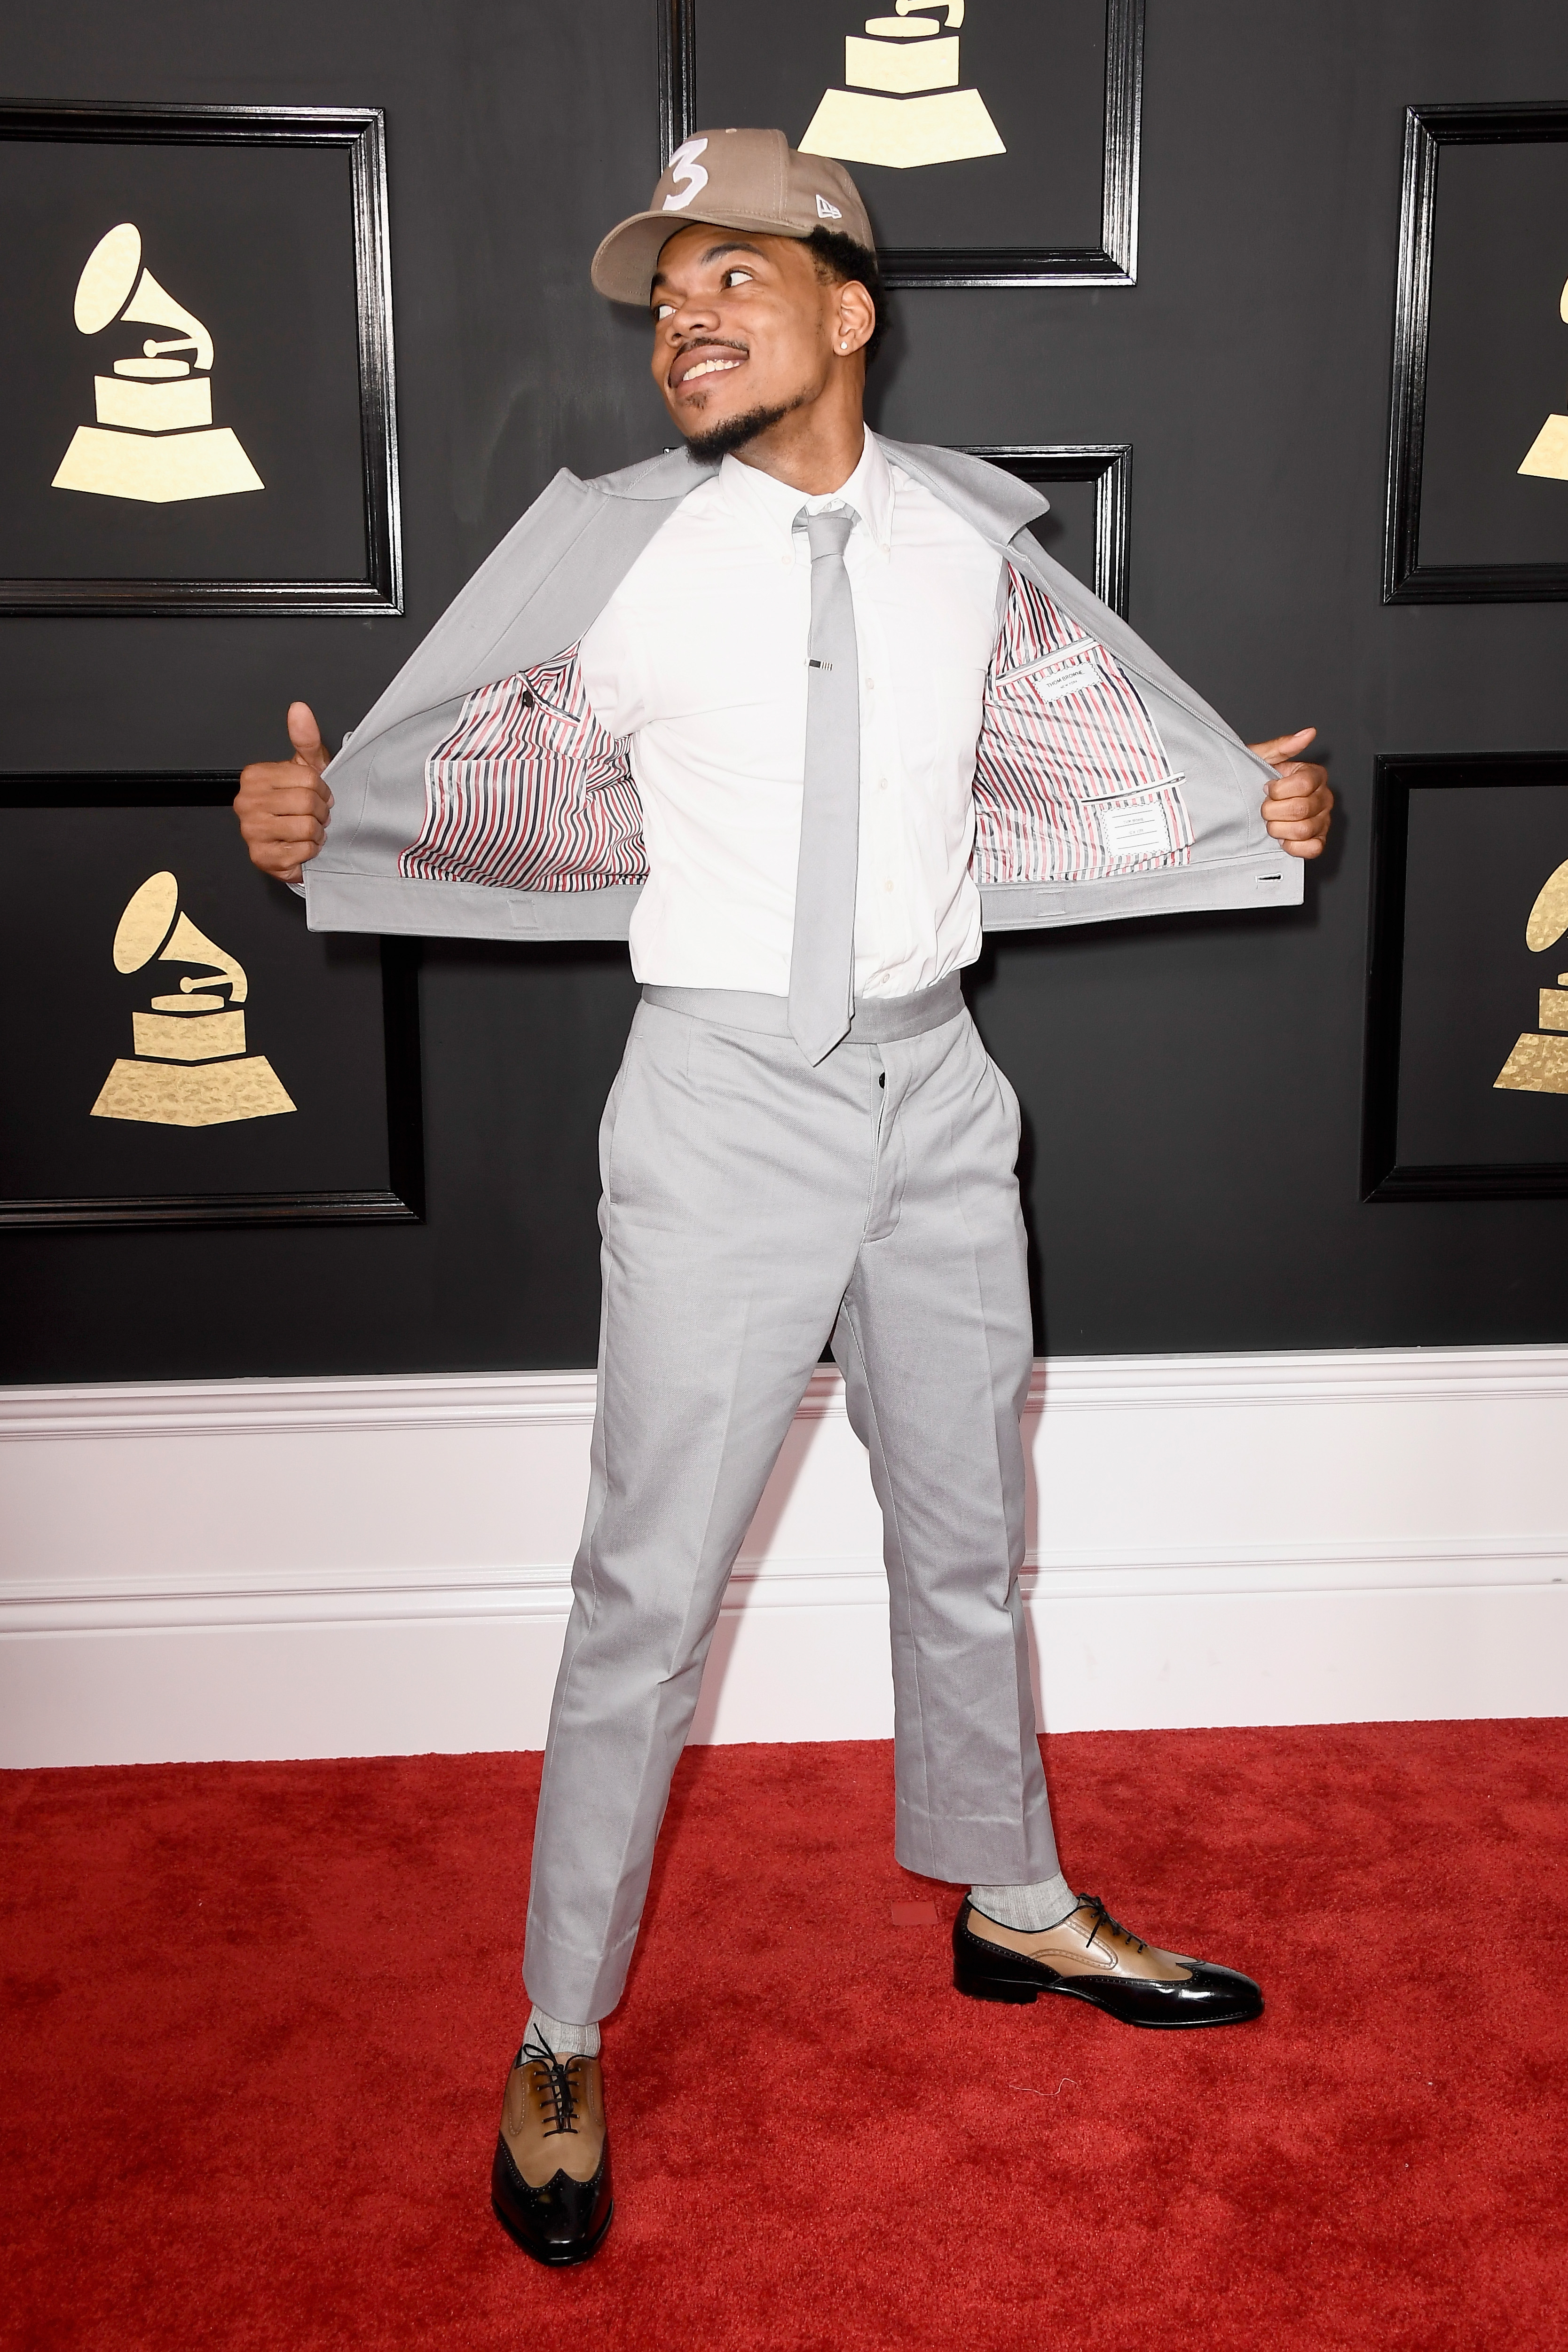 LOS ANGELES, CA - FEBRUARY 12: Chance the Rapper attends The 59th GRAMMY Awards at STAPLES Center on February 12, 2017 in Los Angeles, California. (Photo by Frazer Harrison/Getty Images)